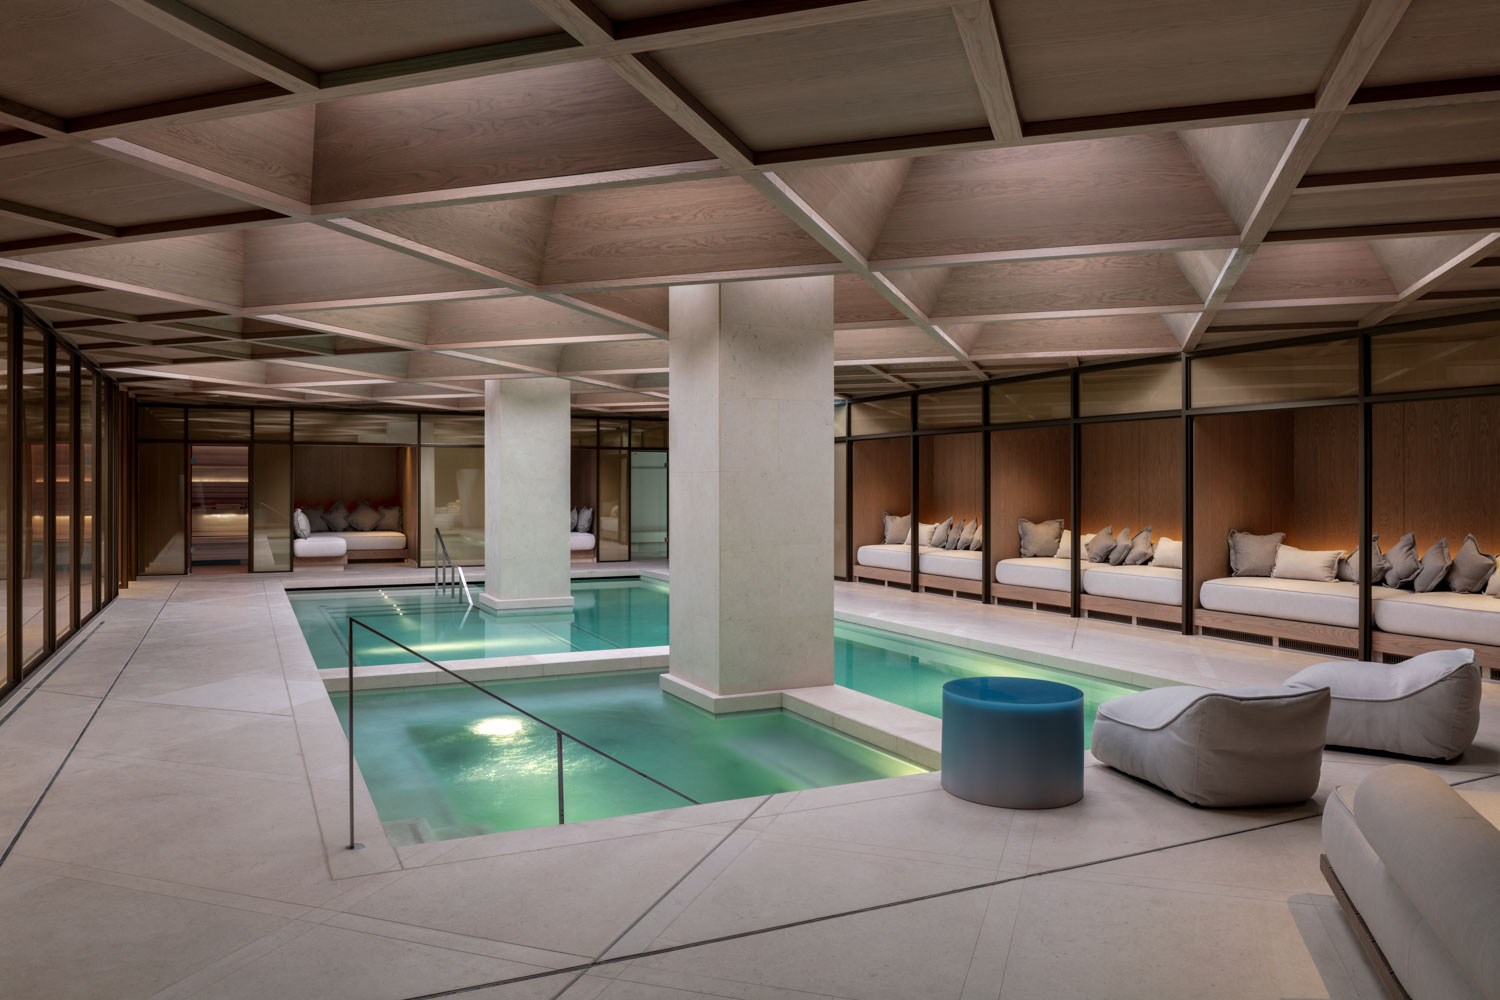 The subterranean spa of The Londoner features a pool and hydro-pool